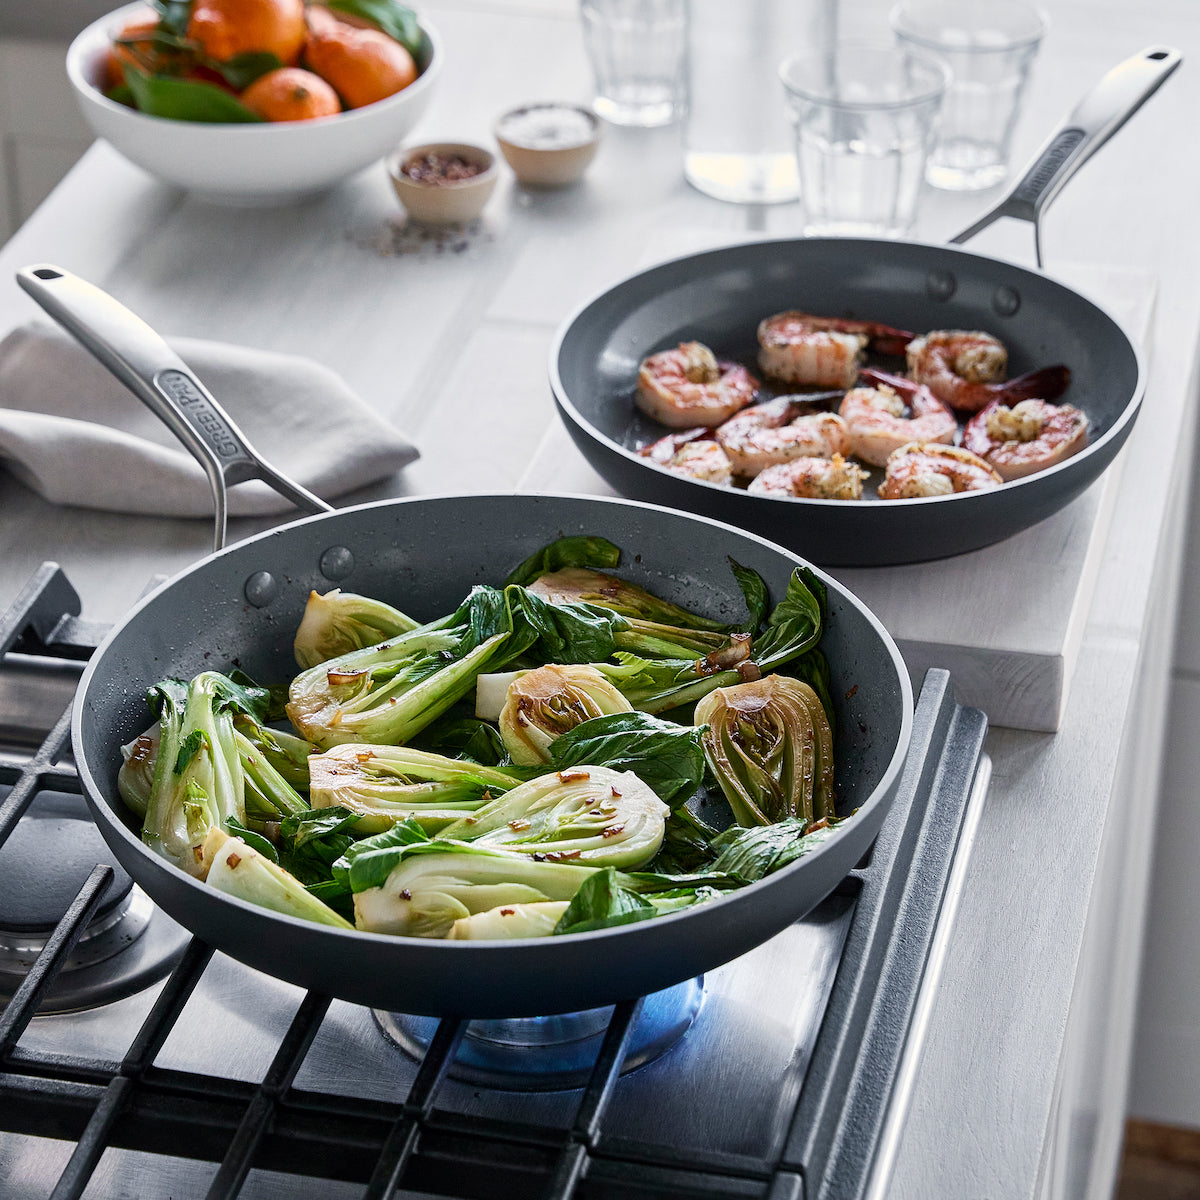 The Non-Toxic Cookware You Need to Try - Color & Chic